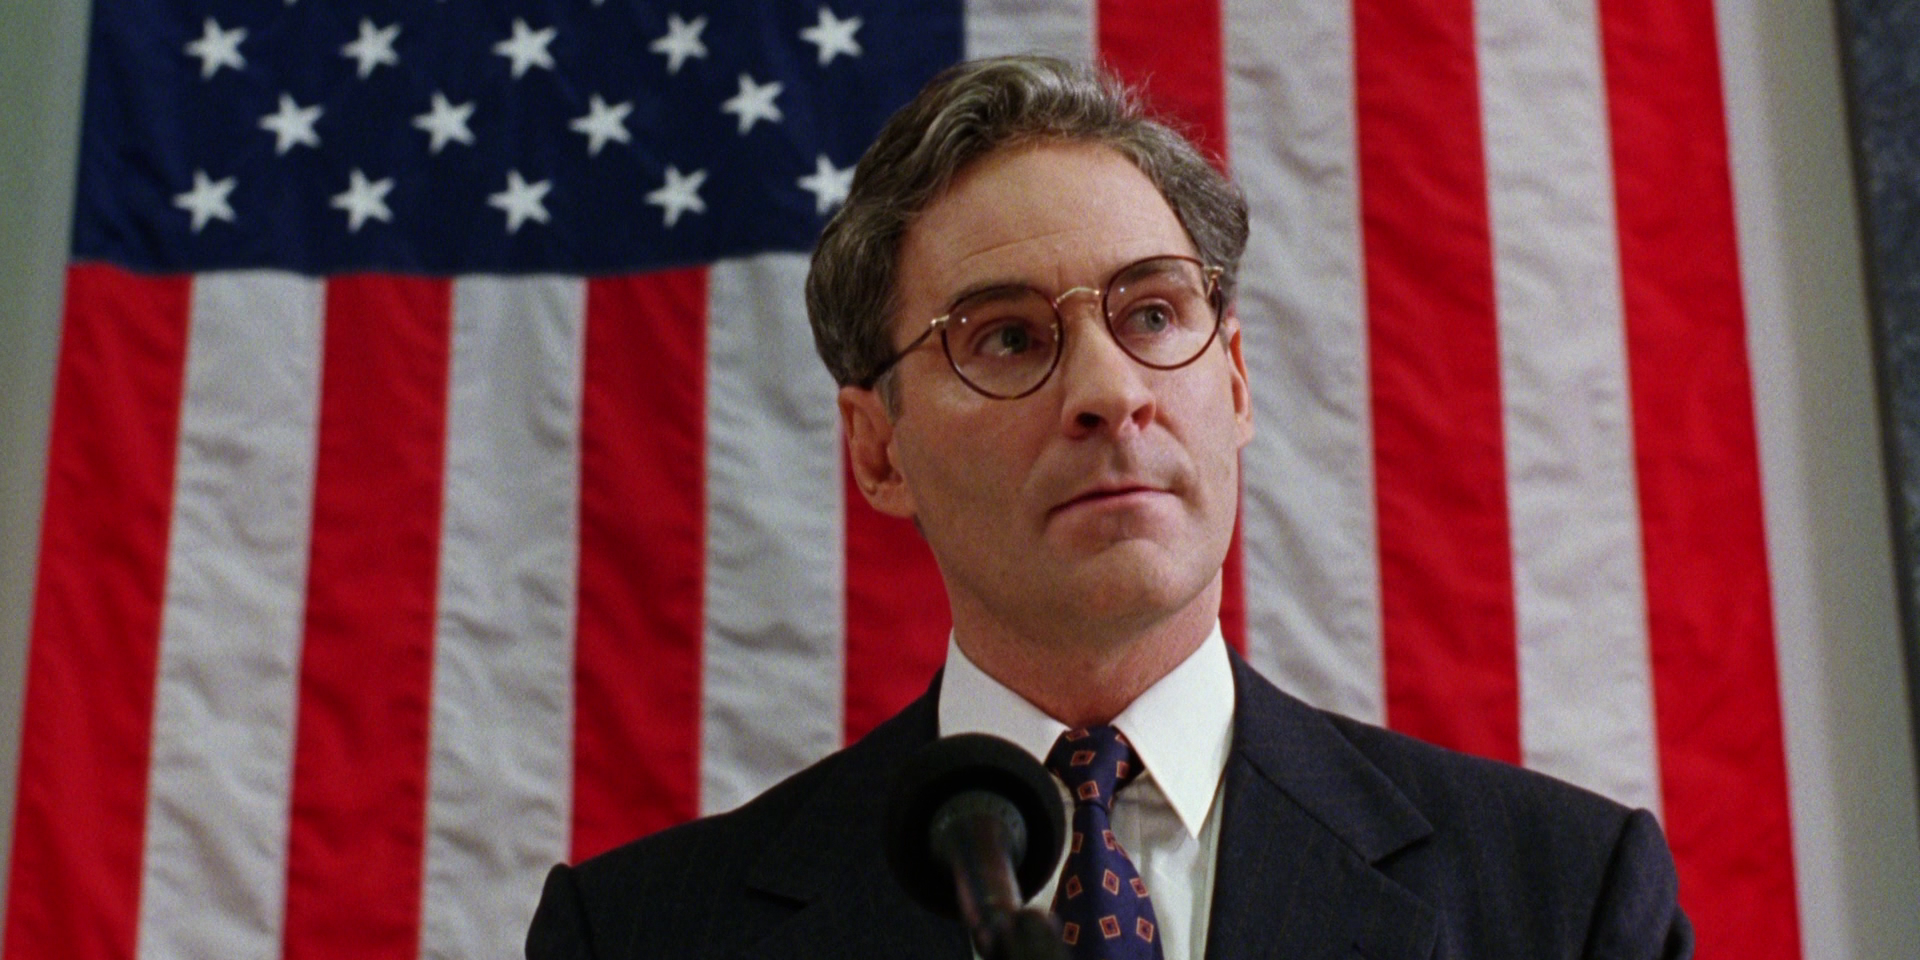 Kevin Kline stands in front of American flag in Dave - Movie Presidents